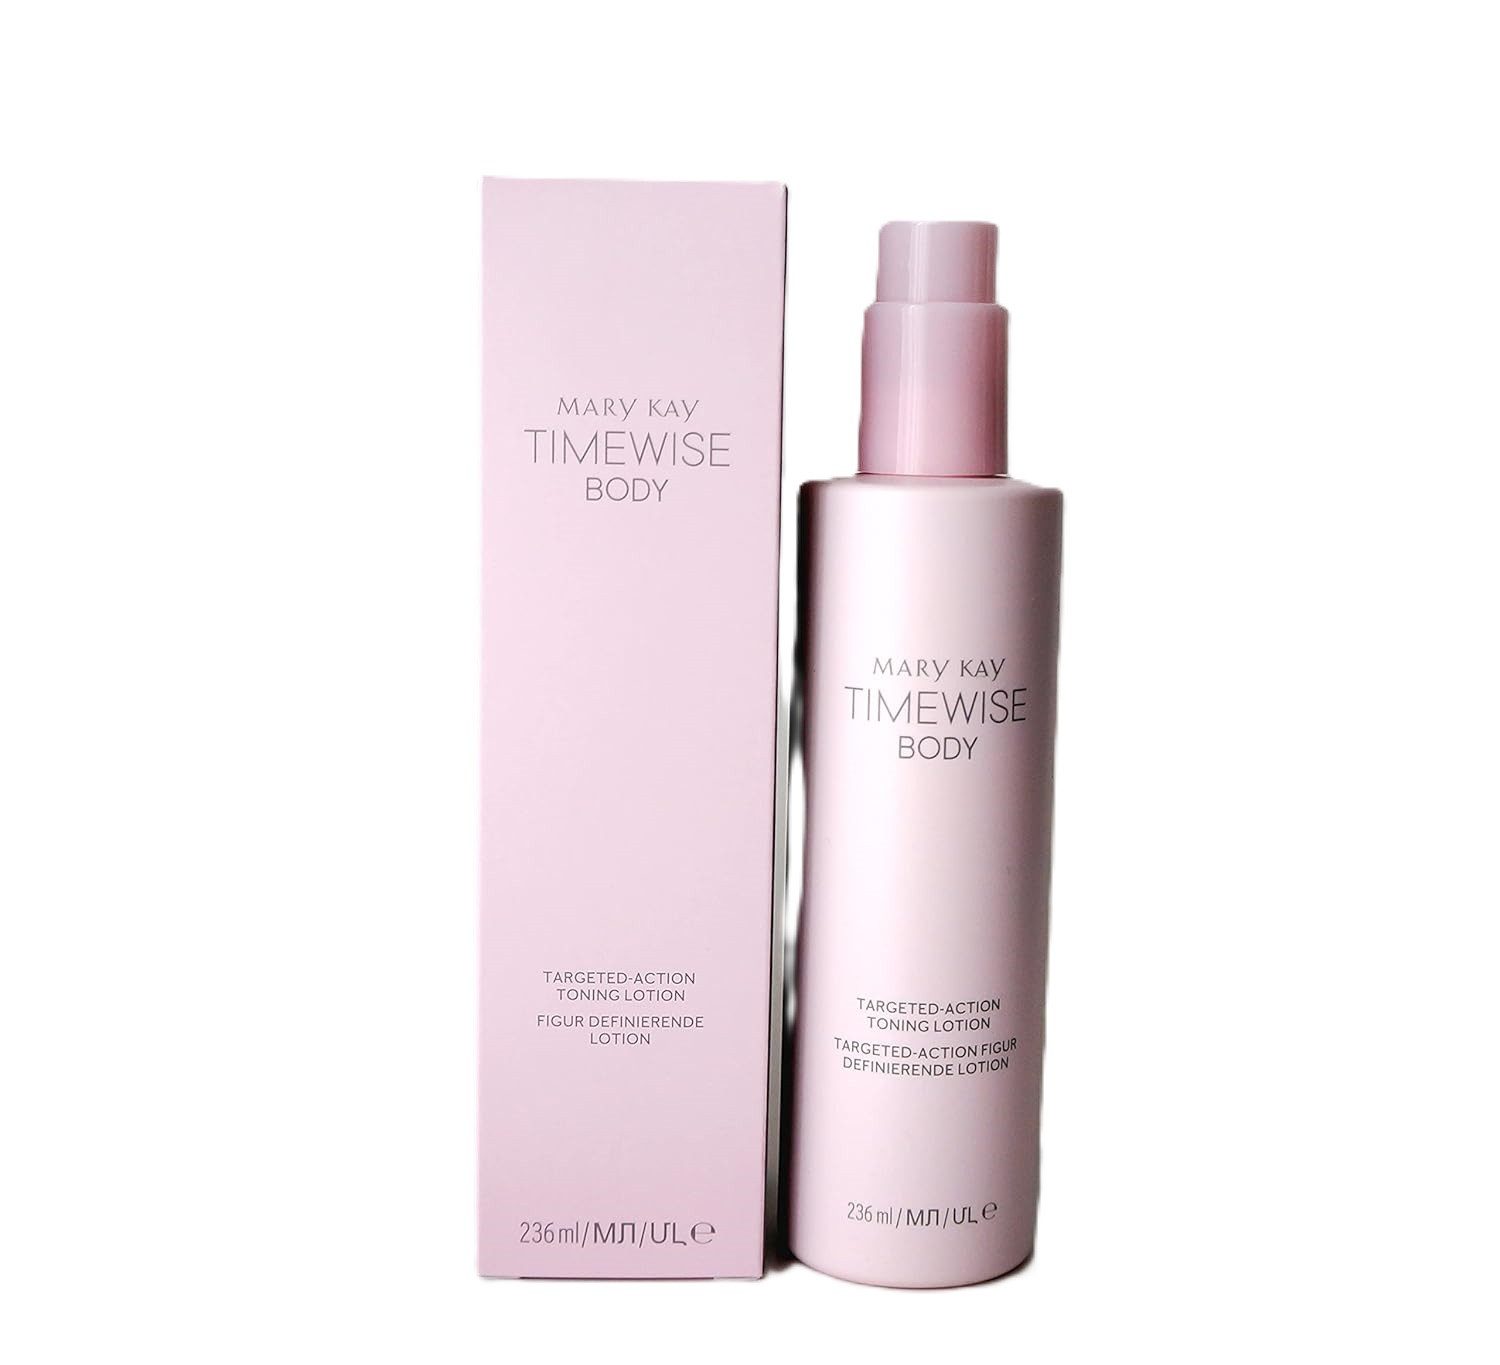 Mary Kay Körperlotion TimeWise Body Targeted-Action Toning Lotion 236ml